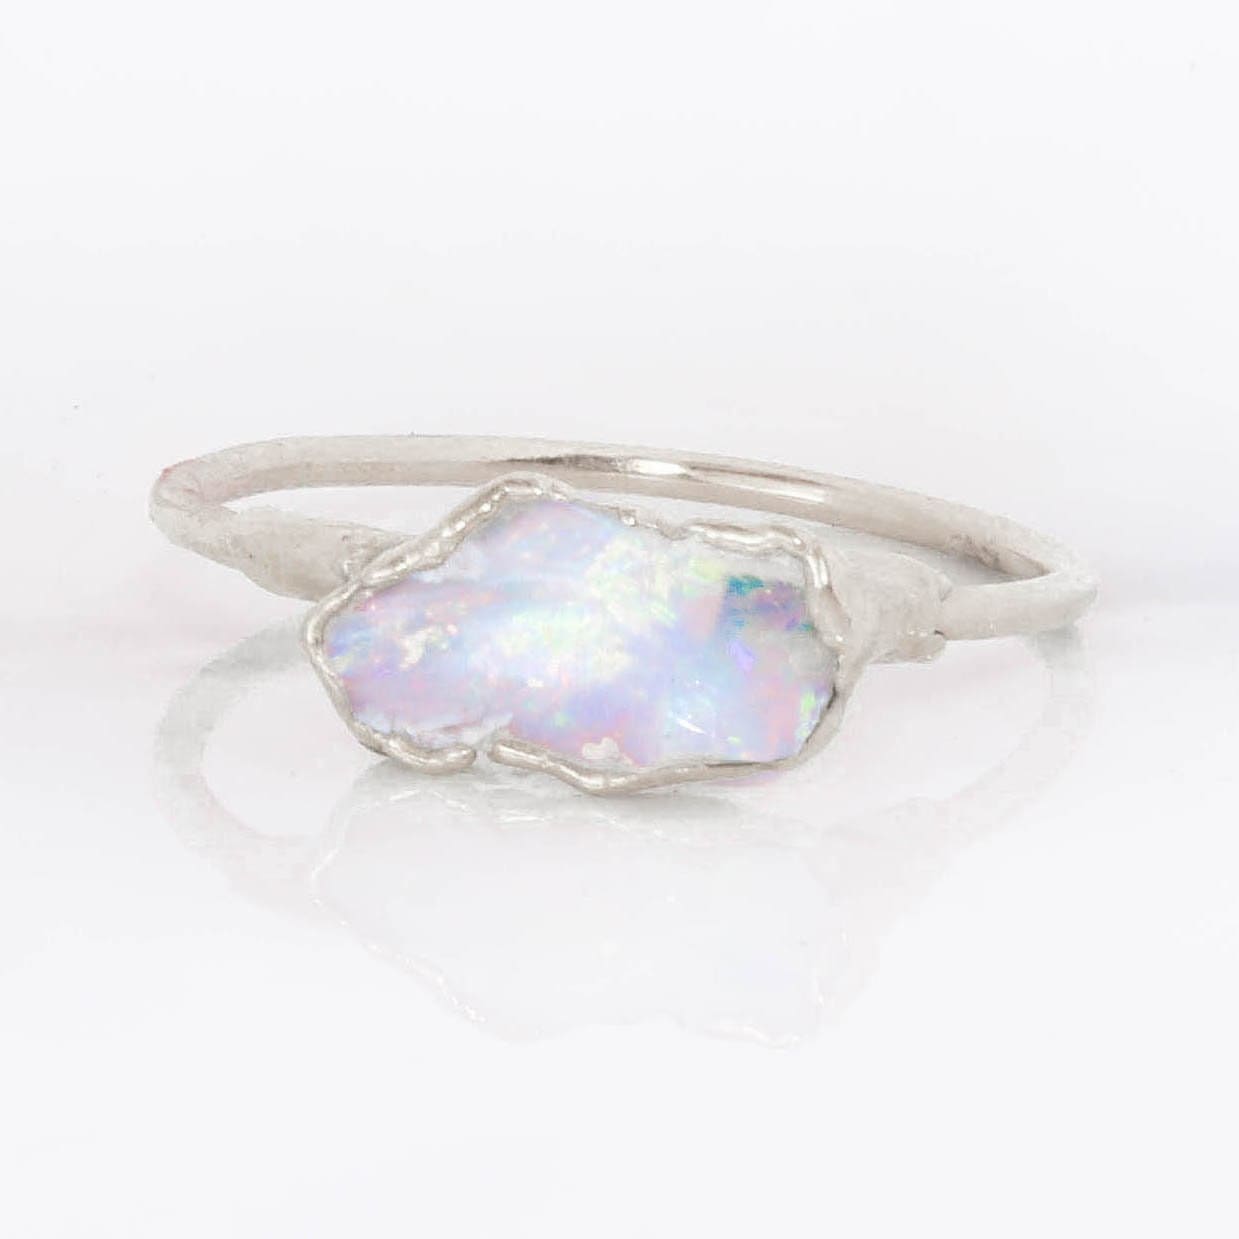 Byzantine Ring with Blue Opal Stone - 925 Sterling Silver Gold Plated -  GREEK ROOTS